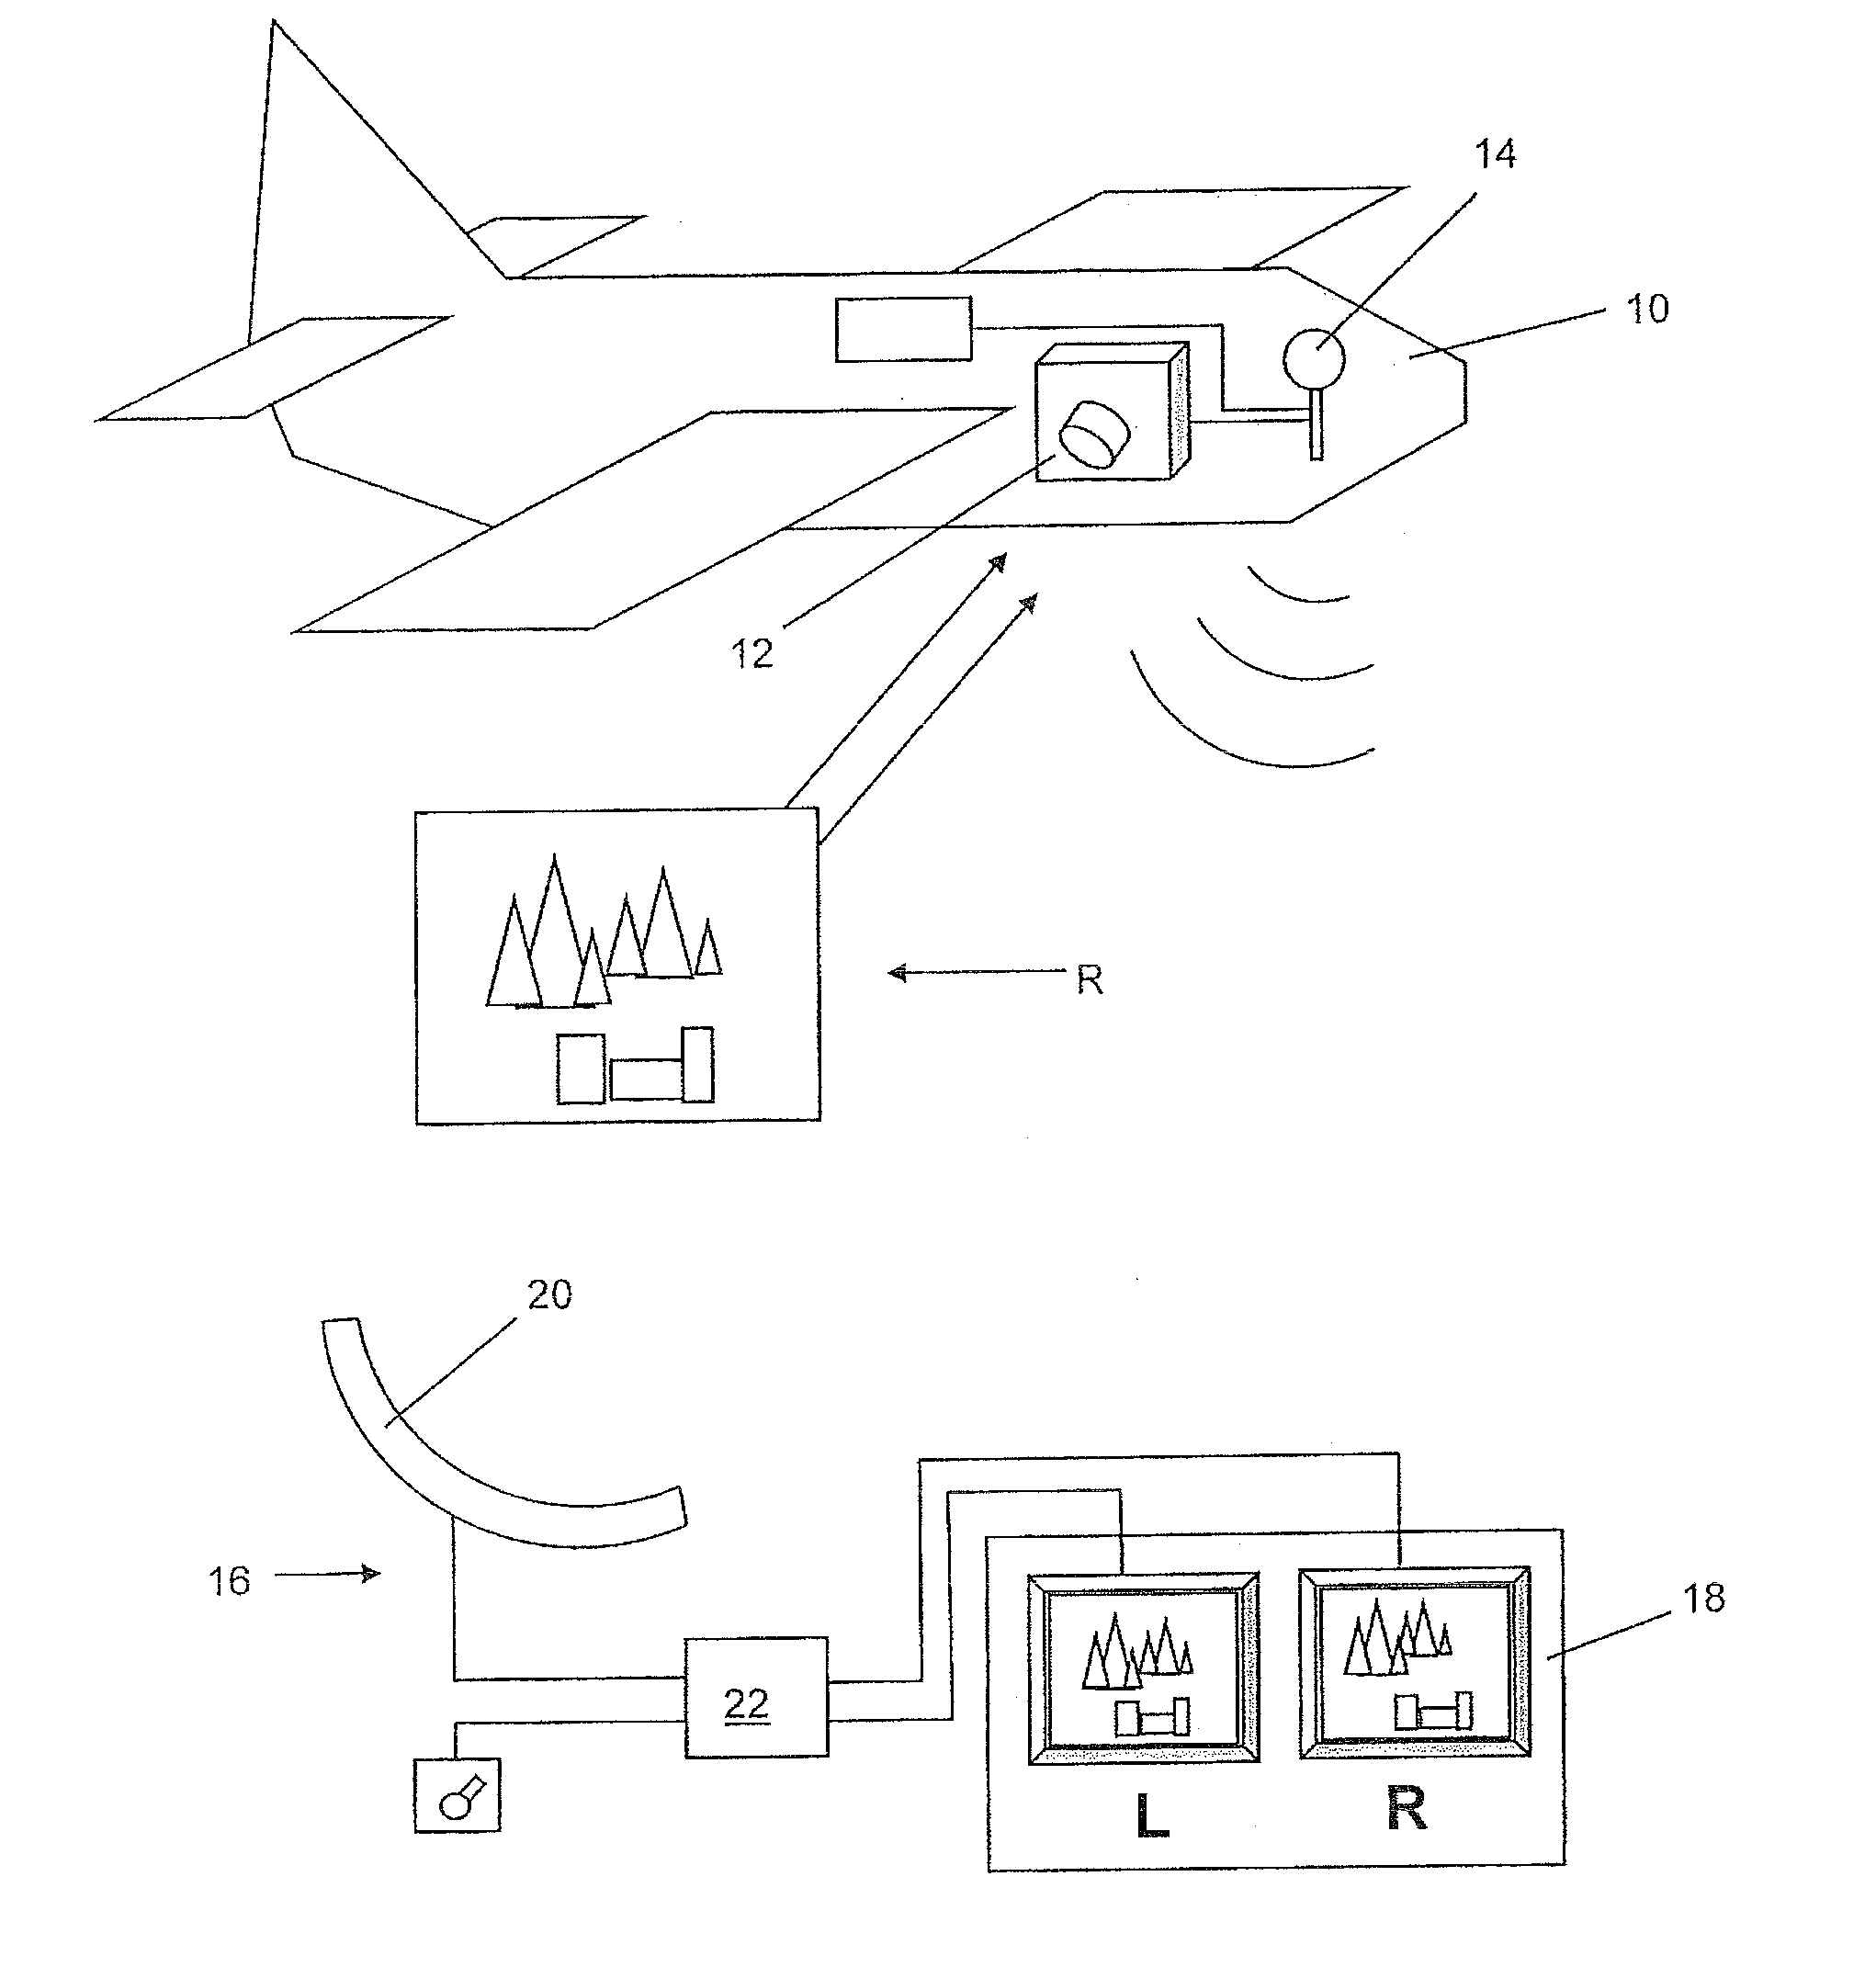 Method and apparatus for displaying stereographic images